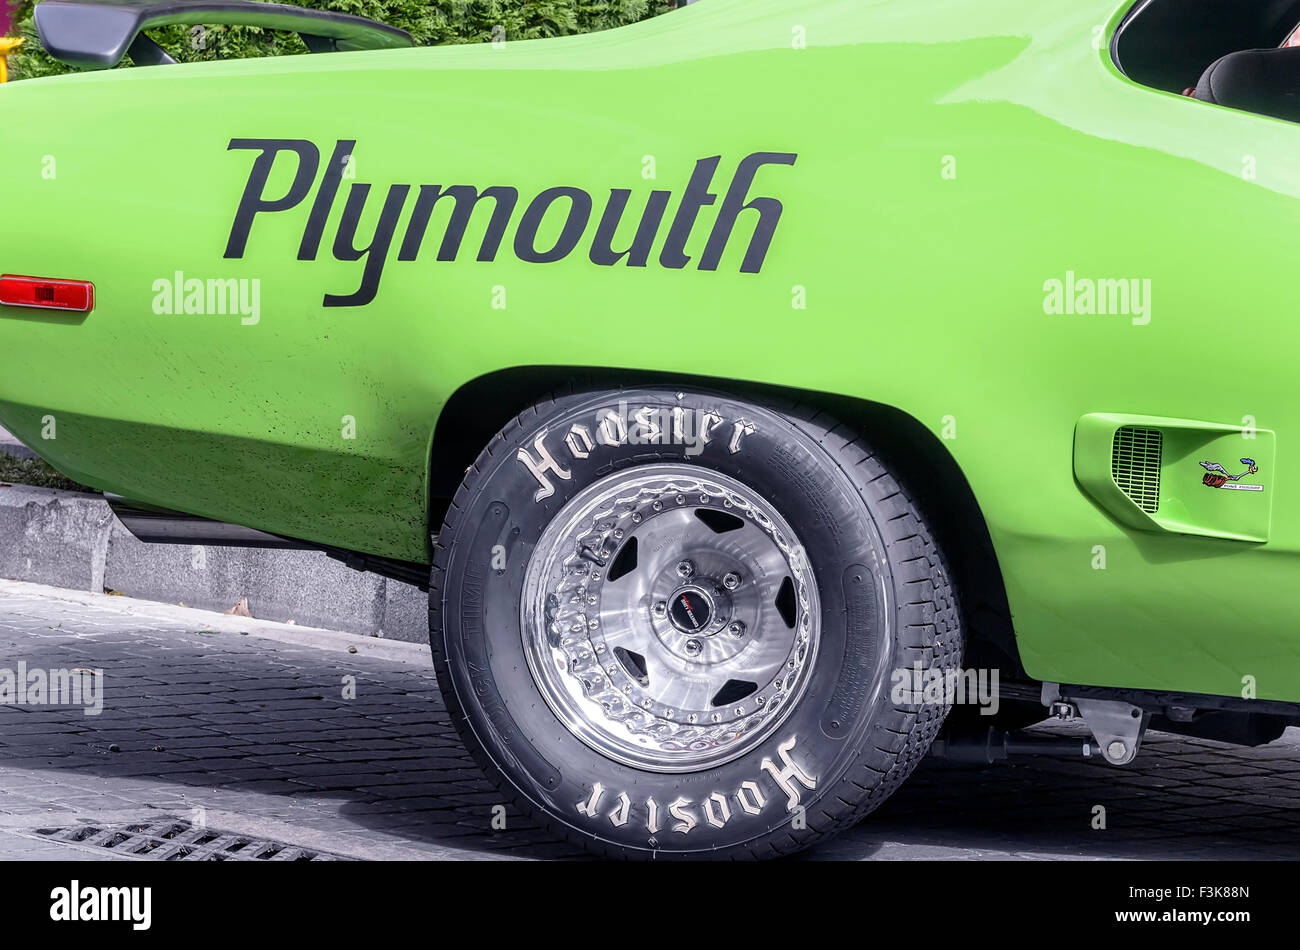 Meeting Of Classic American Cars Rear Lateral Of Green Car Plymouth Road Runner 440 Of 1971 Stock Photo Alamy